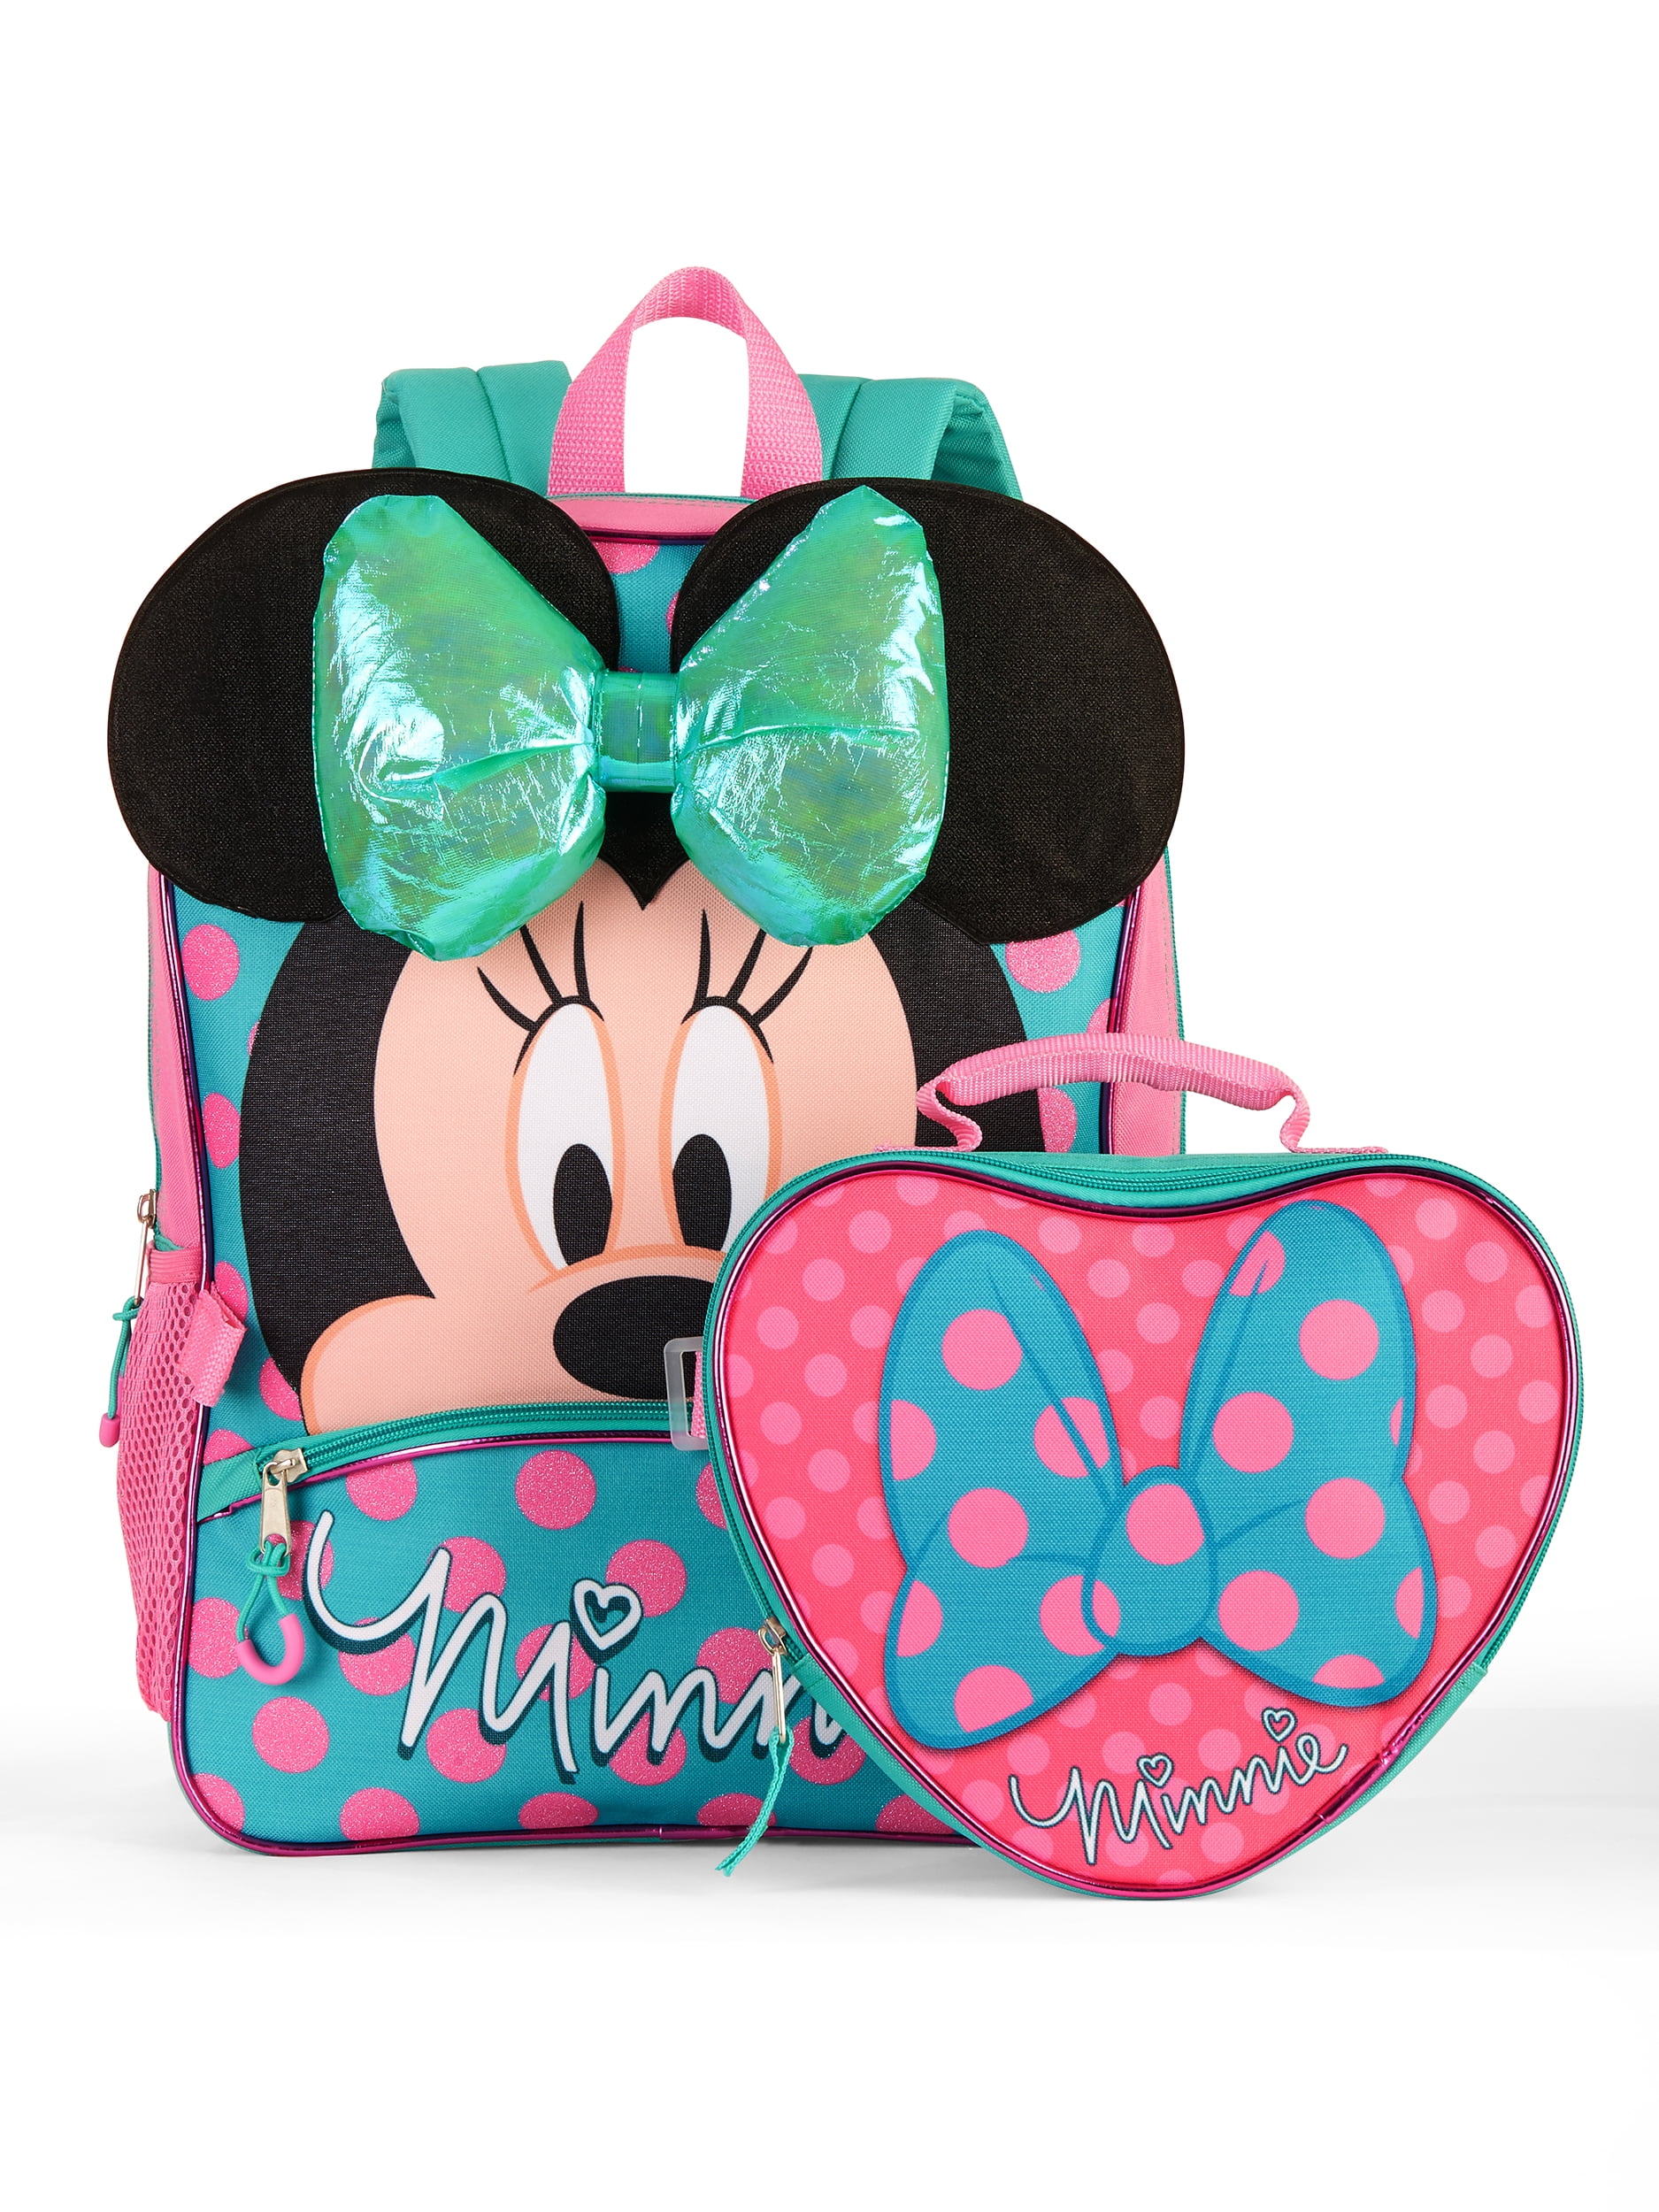 Minnie Mouse - Minnie Mouse Backpack With Lunch Bag - www.lvbagssale.com - www.lvbagssale.com